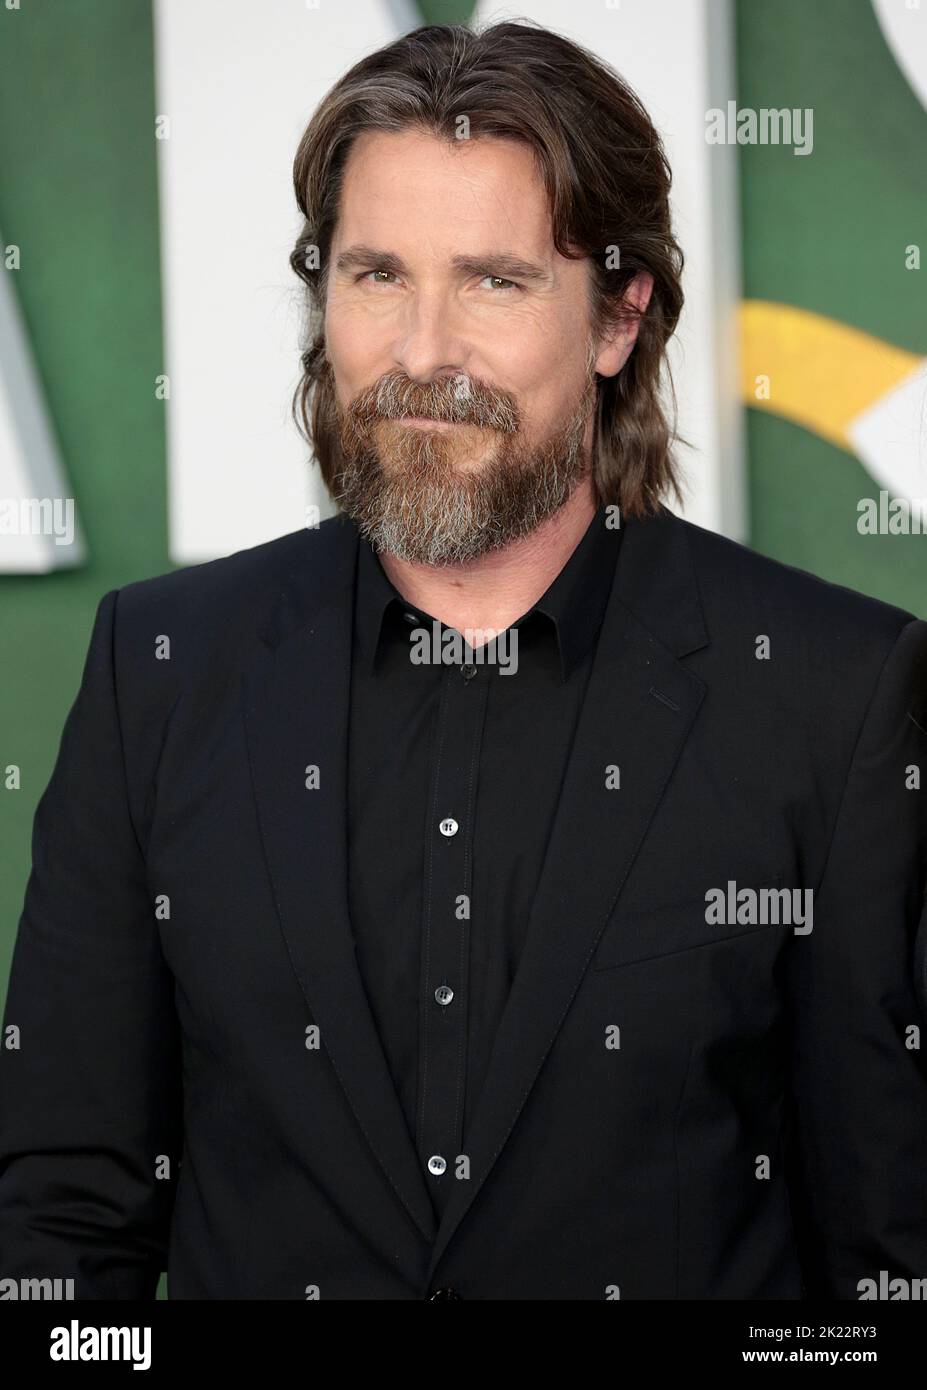 Sep 21, 2022 - London, England, UK - Christian Bale bei der Europa-Premiere in Amsterdam, Odeon Luxe, Leicester Square Stockfoto